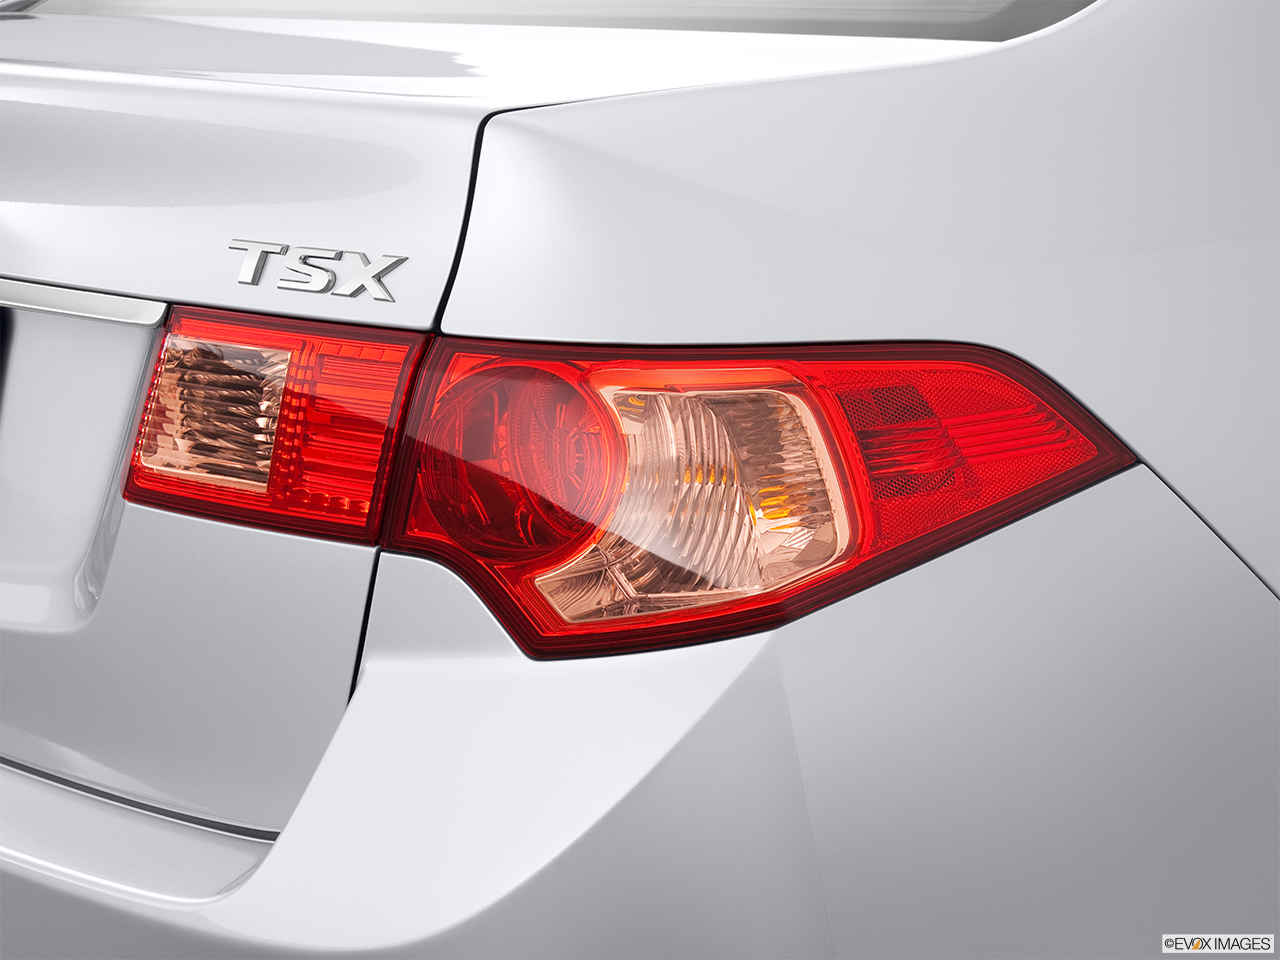 2013 Acura TSX 5-speed Automatic Passenger Side Taillight. 